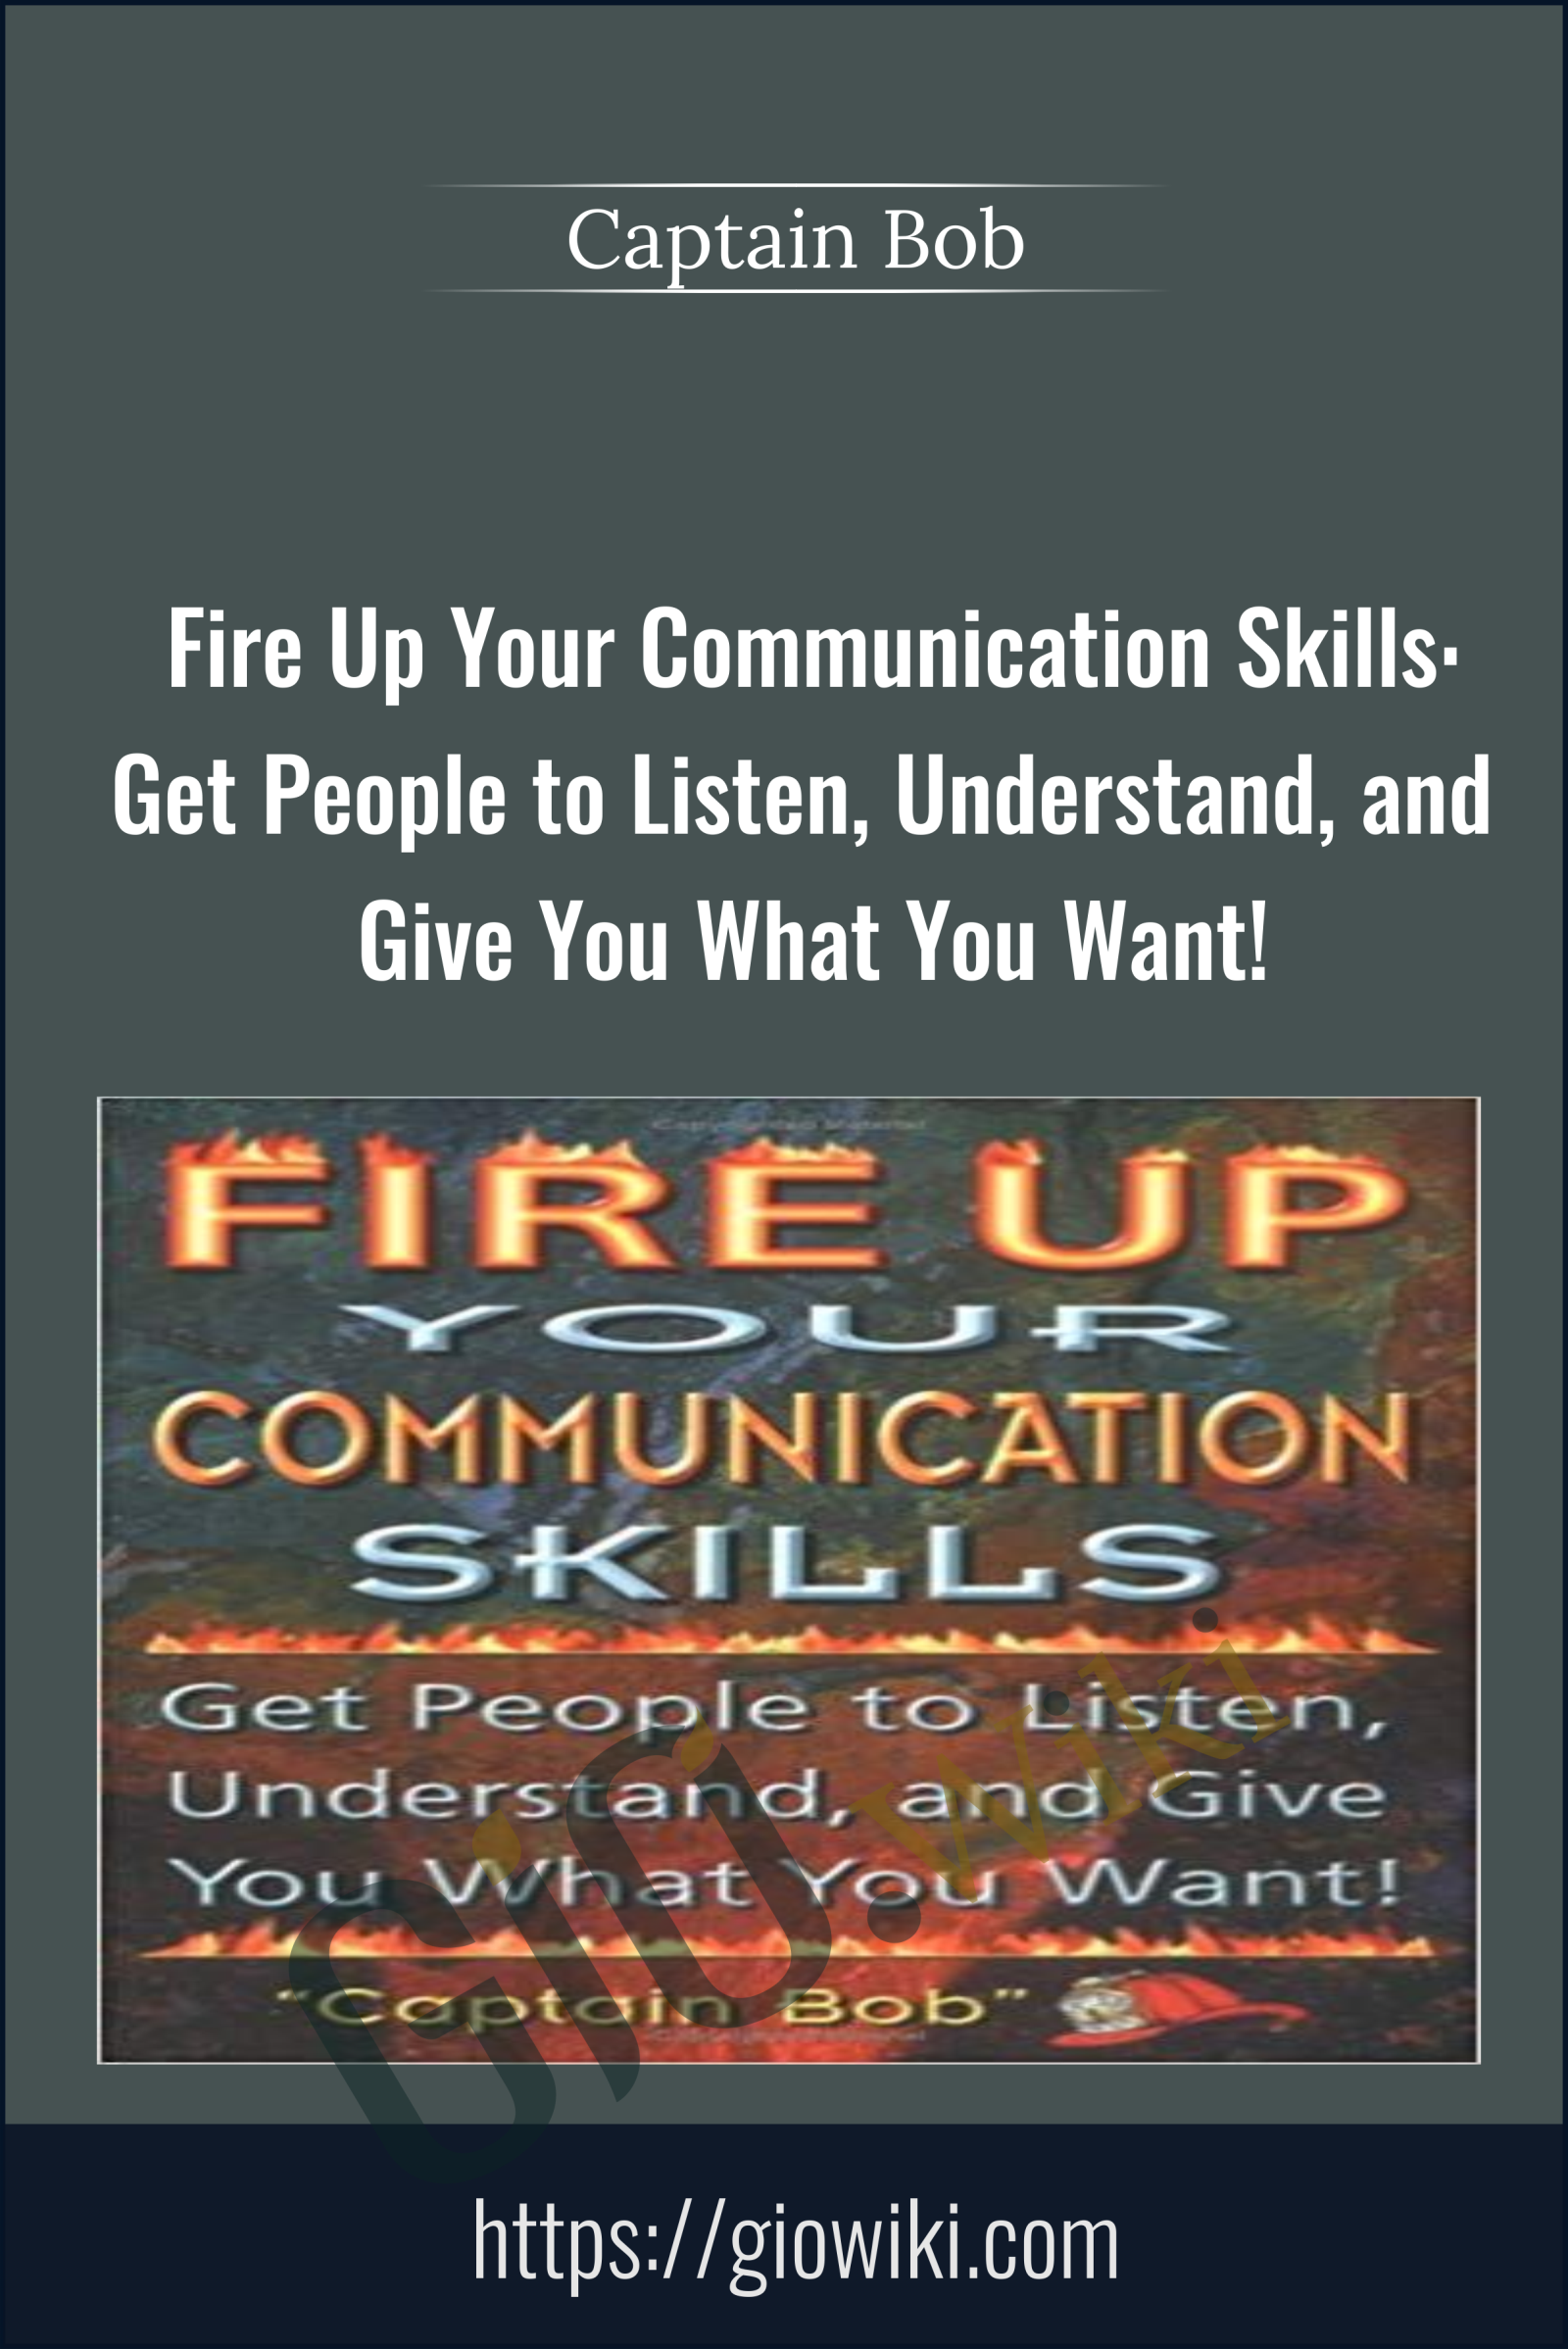 Fire Up Your Communication Skills: Get People to Listen, Understand, and Give You What You Want! - Captain Bob